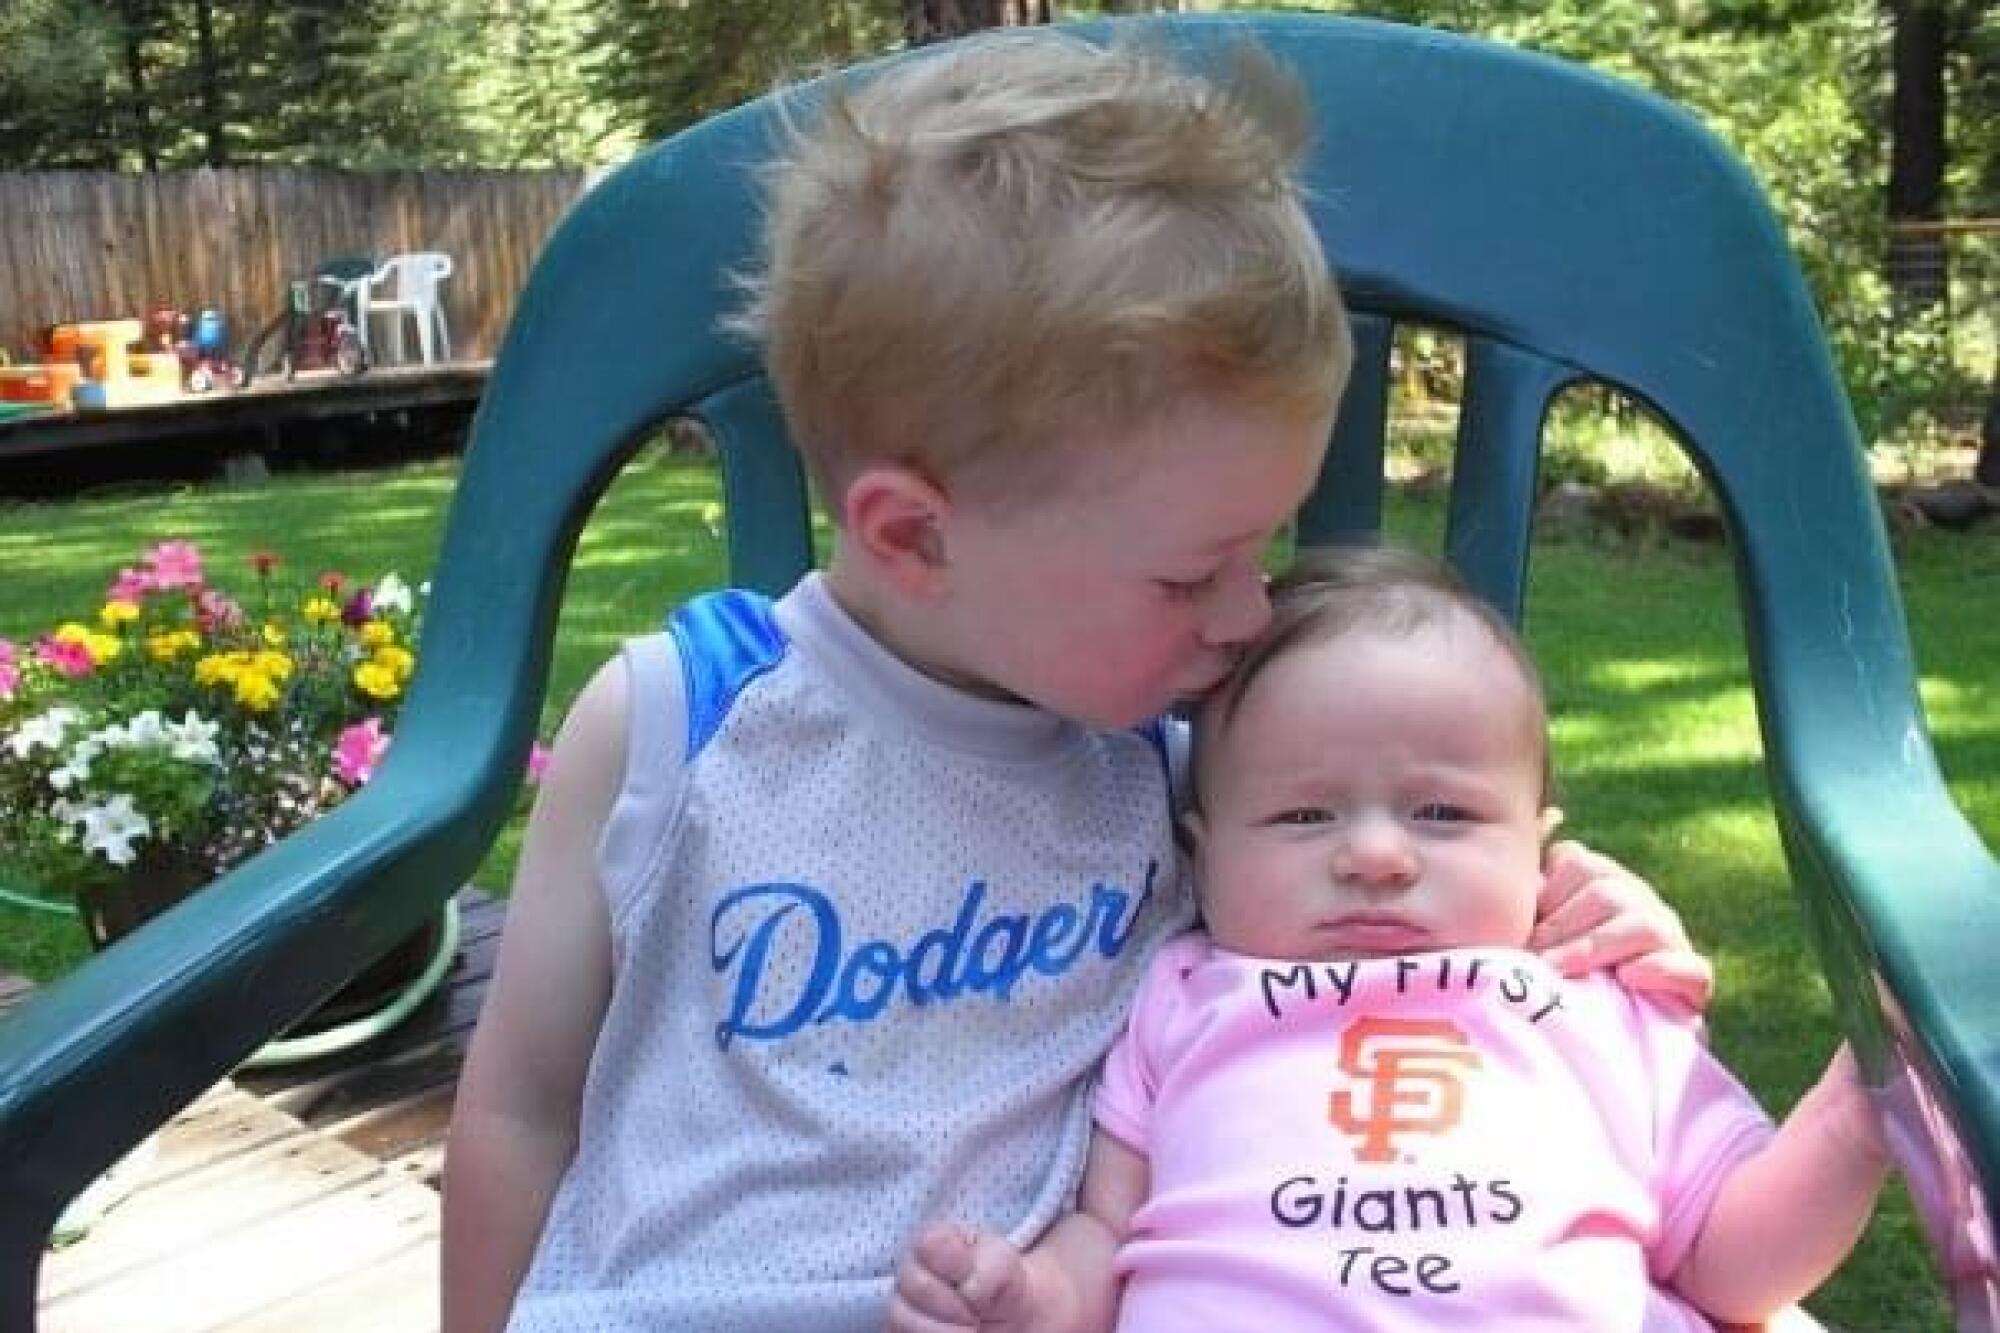 The children of Scott Green, a Dodger fan who married a Giants fan, are carrying on the family rivalry.